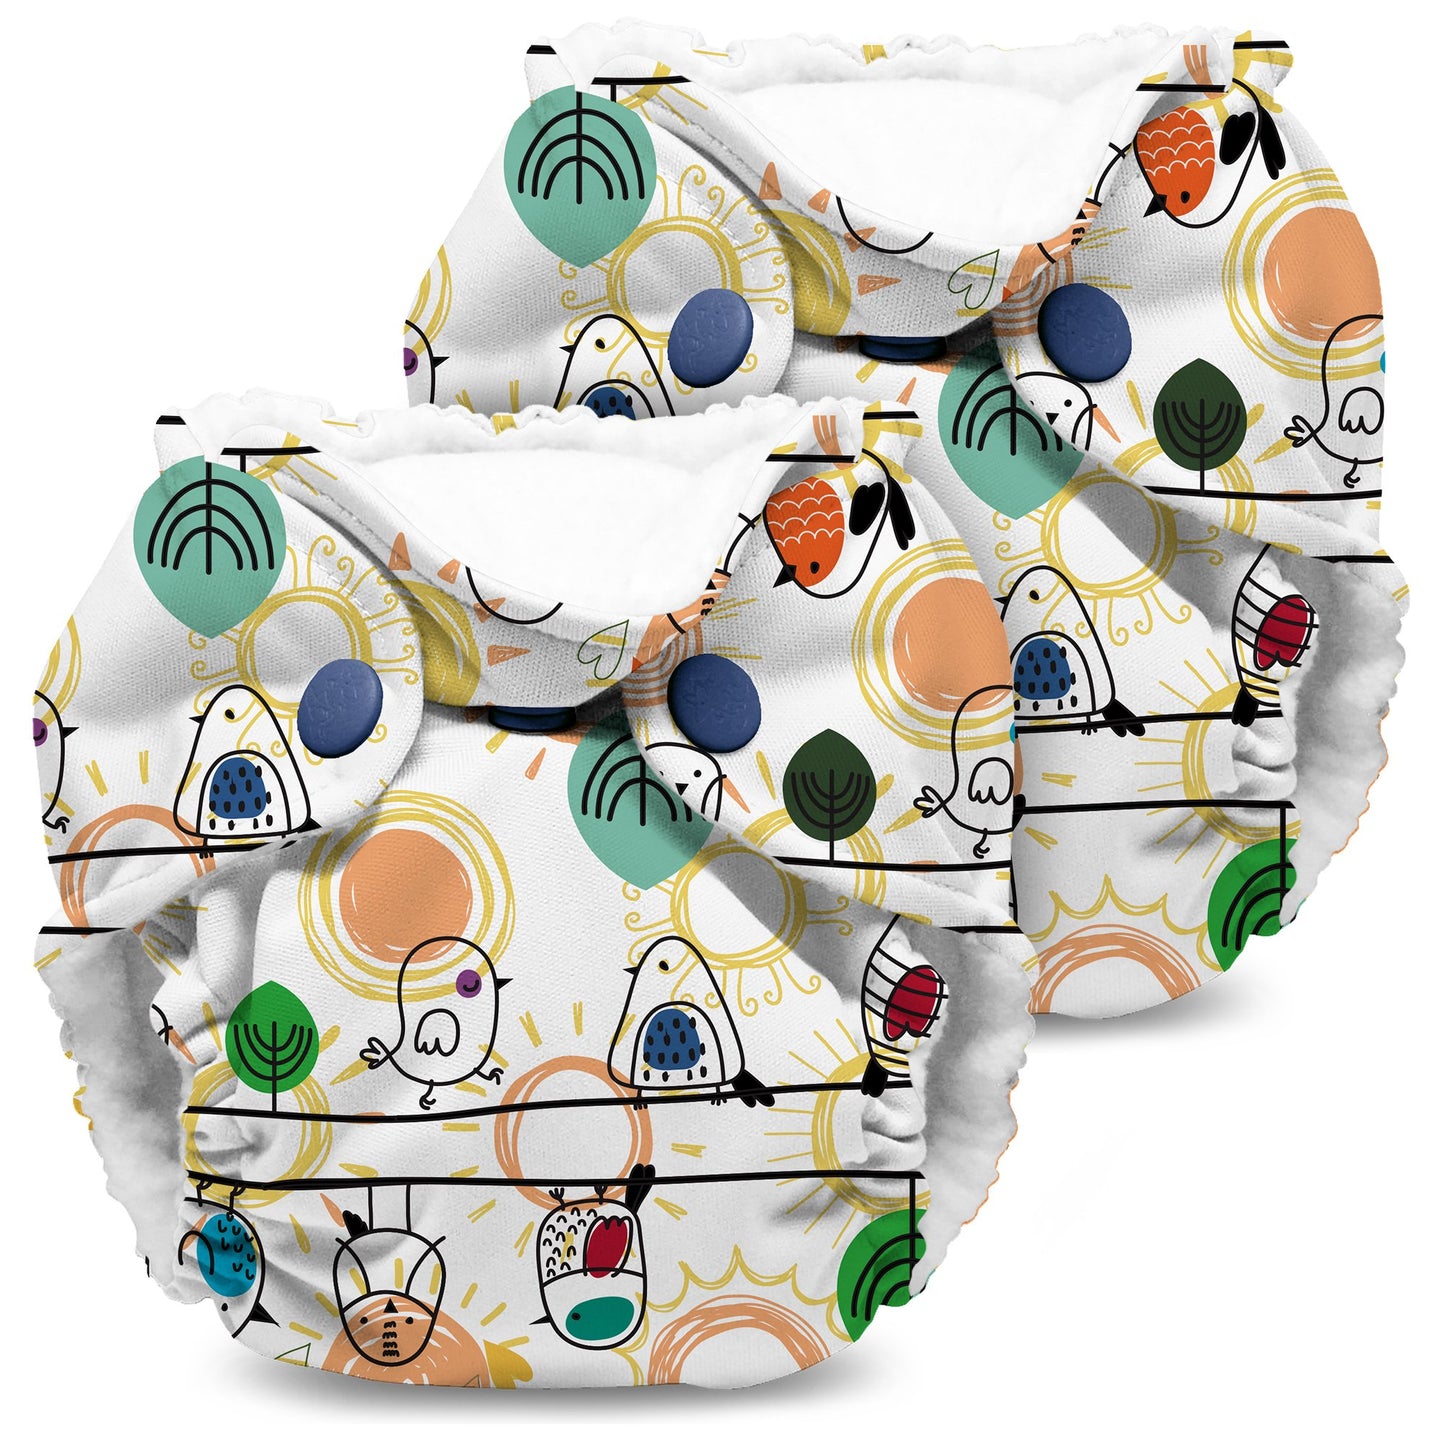 Kanga Care Lil Joey Newborn All In One Cloth Diaper - 2 Pack (Sold Out)